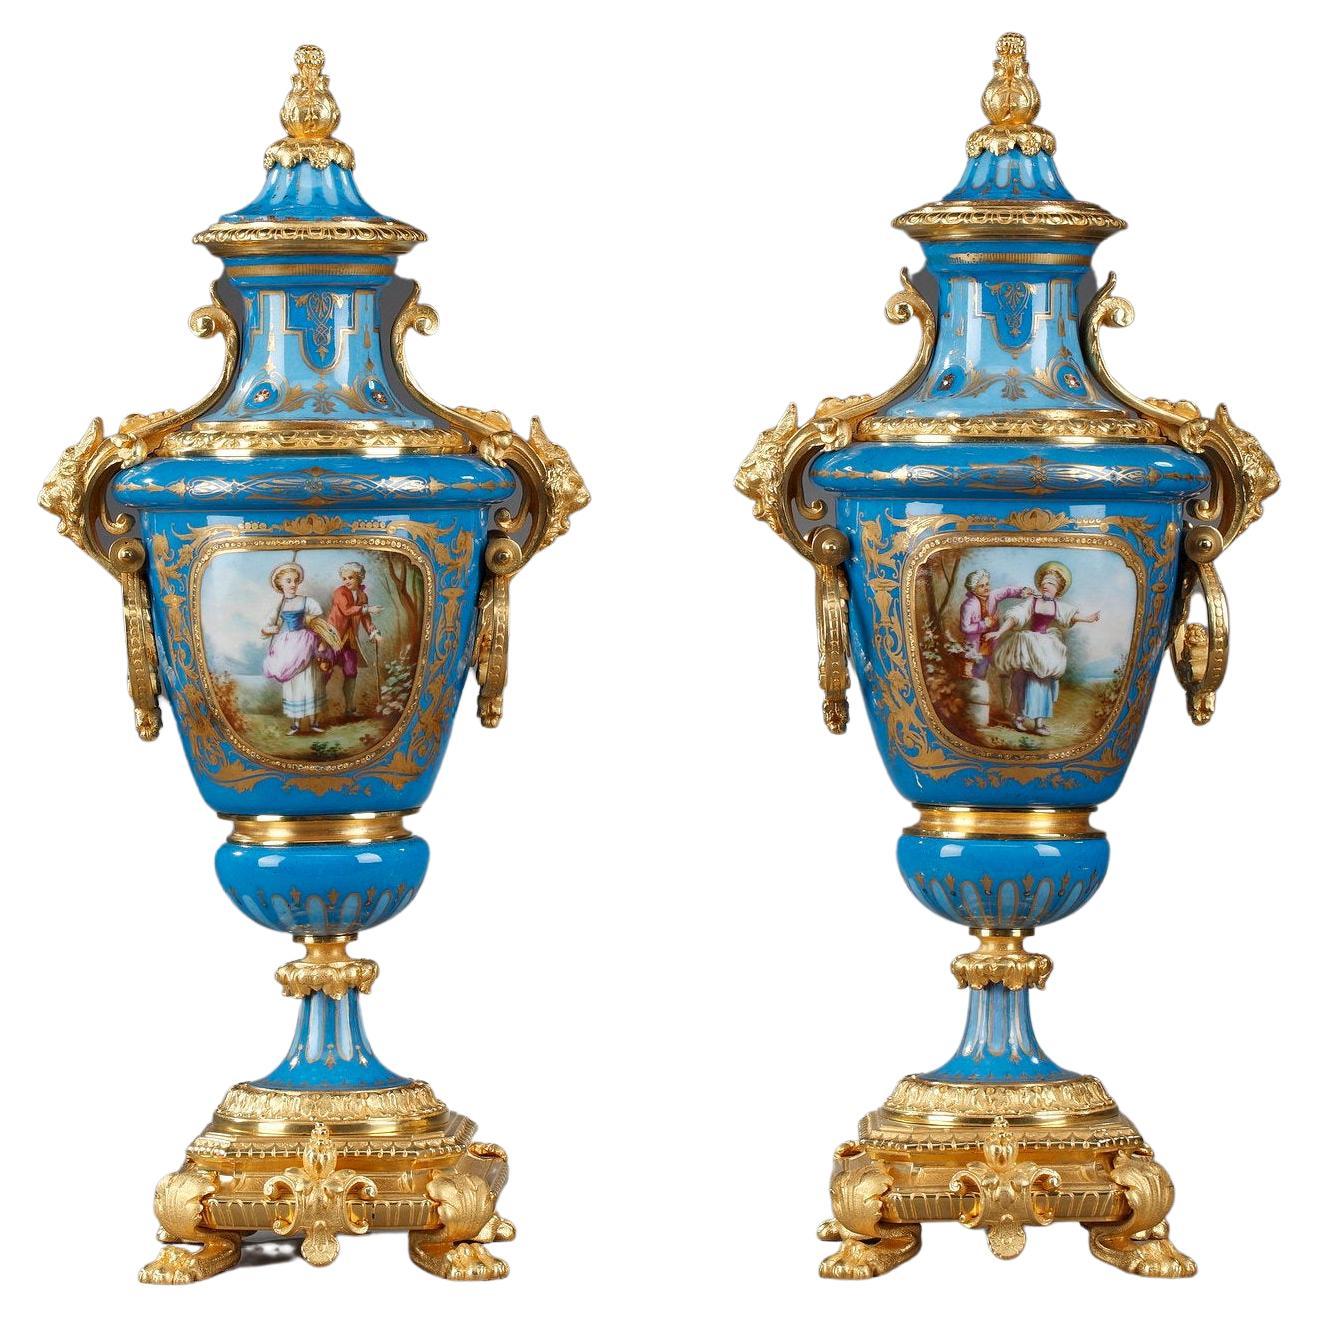 Pair of Covered Vases in Polychrome Porcelain in the Taste of Sèvres